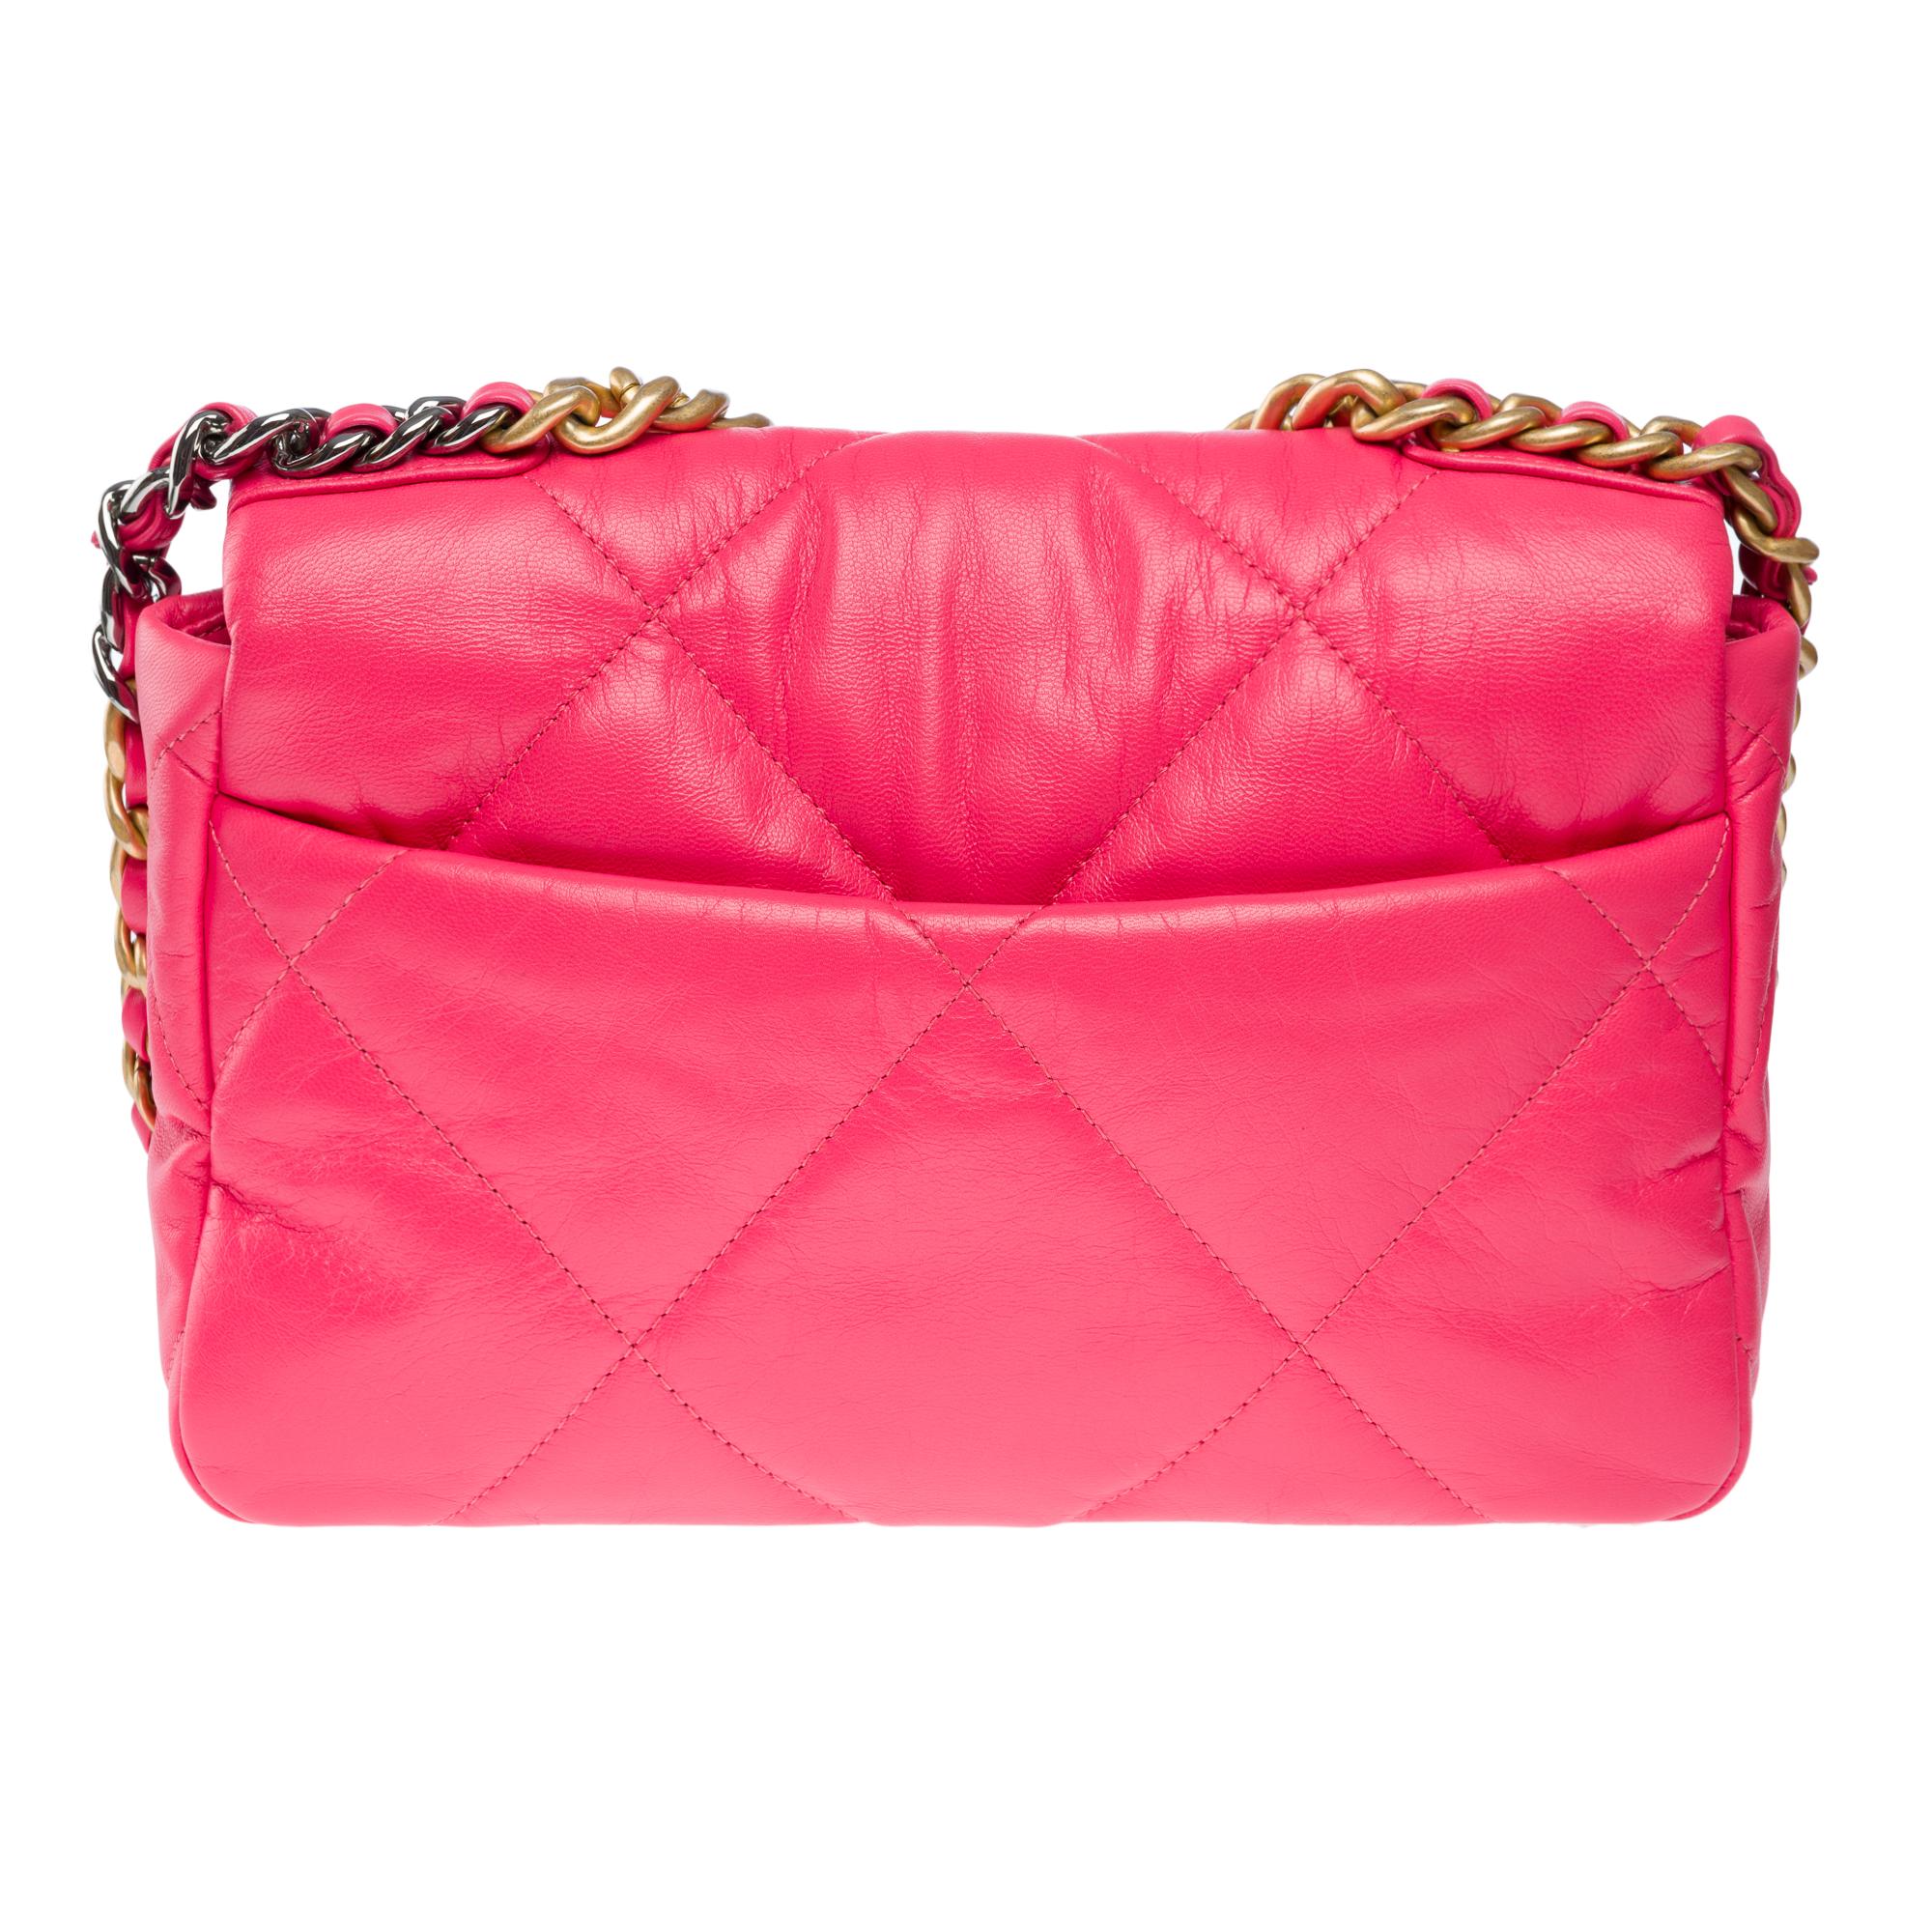 Stunning Chanel 19 shoulder bag in Pink quilted leather , Matt gold and SHW 1